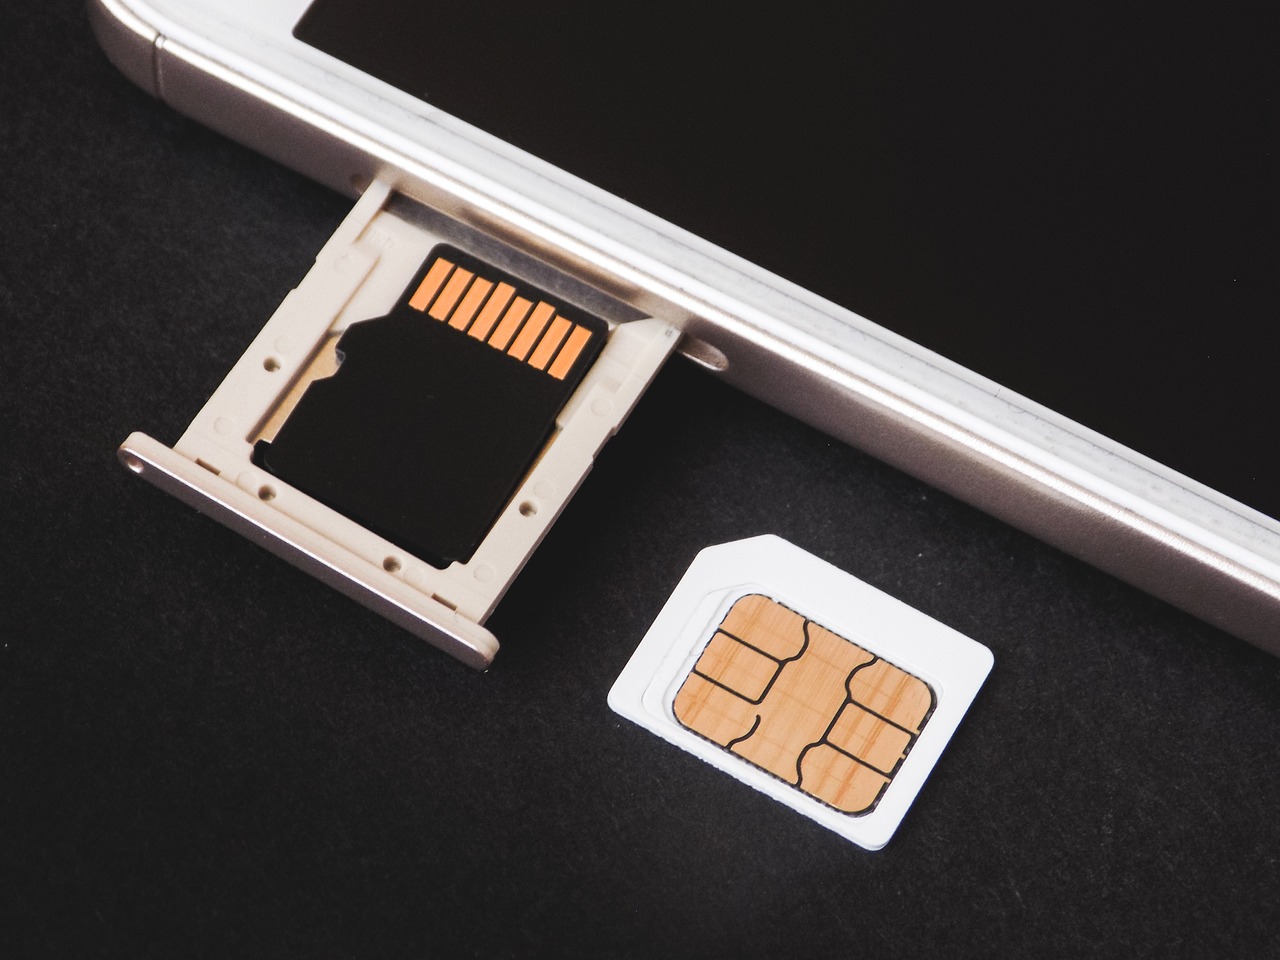 Can You Put A Contract SIM Card In Another Phone?